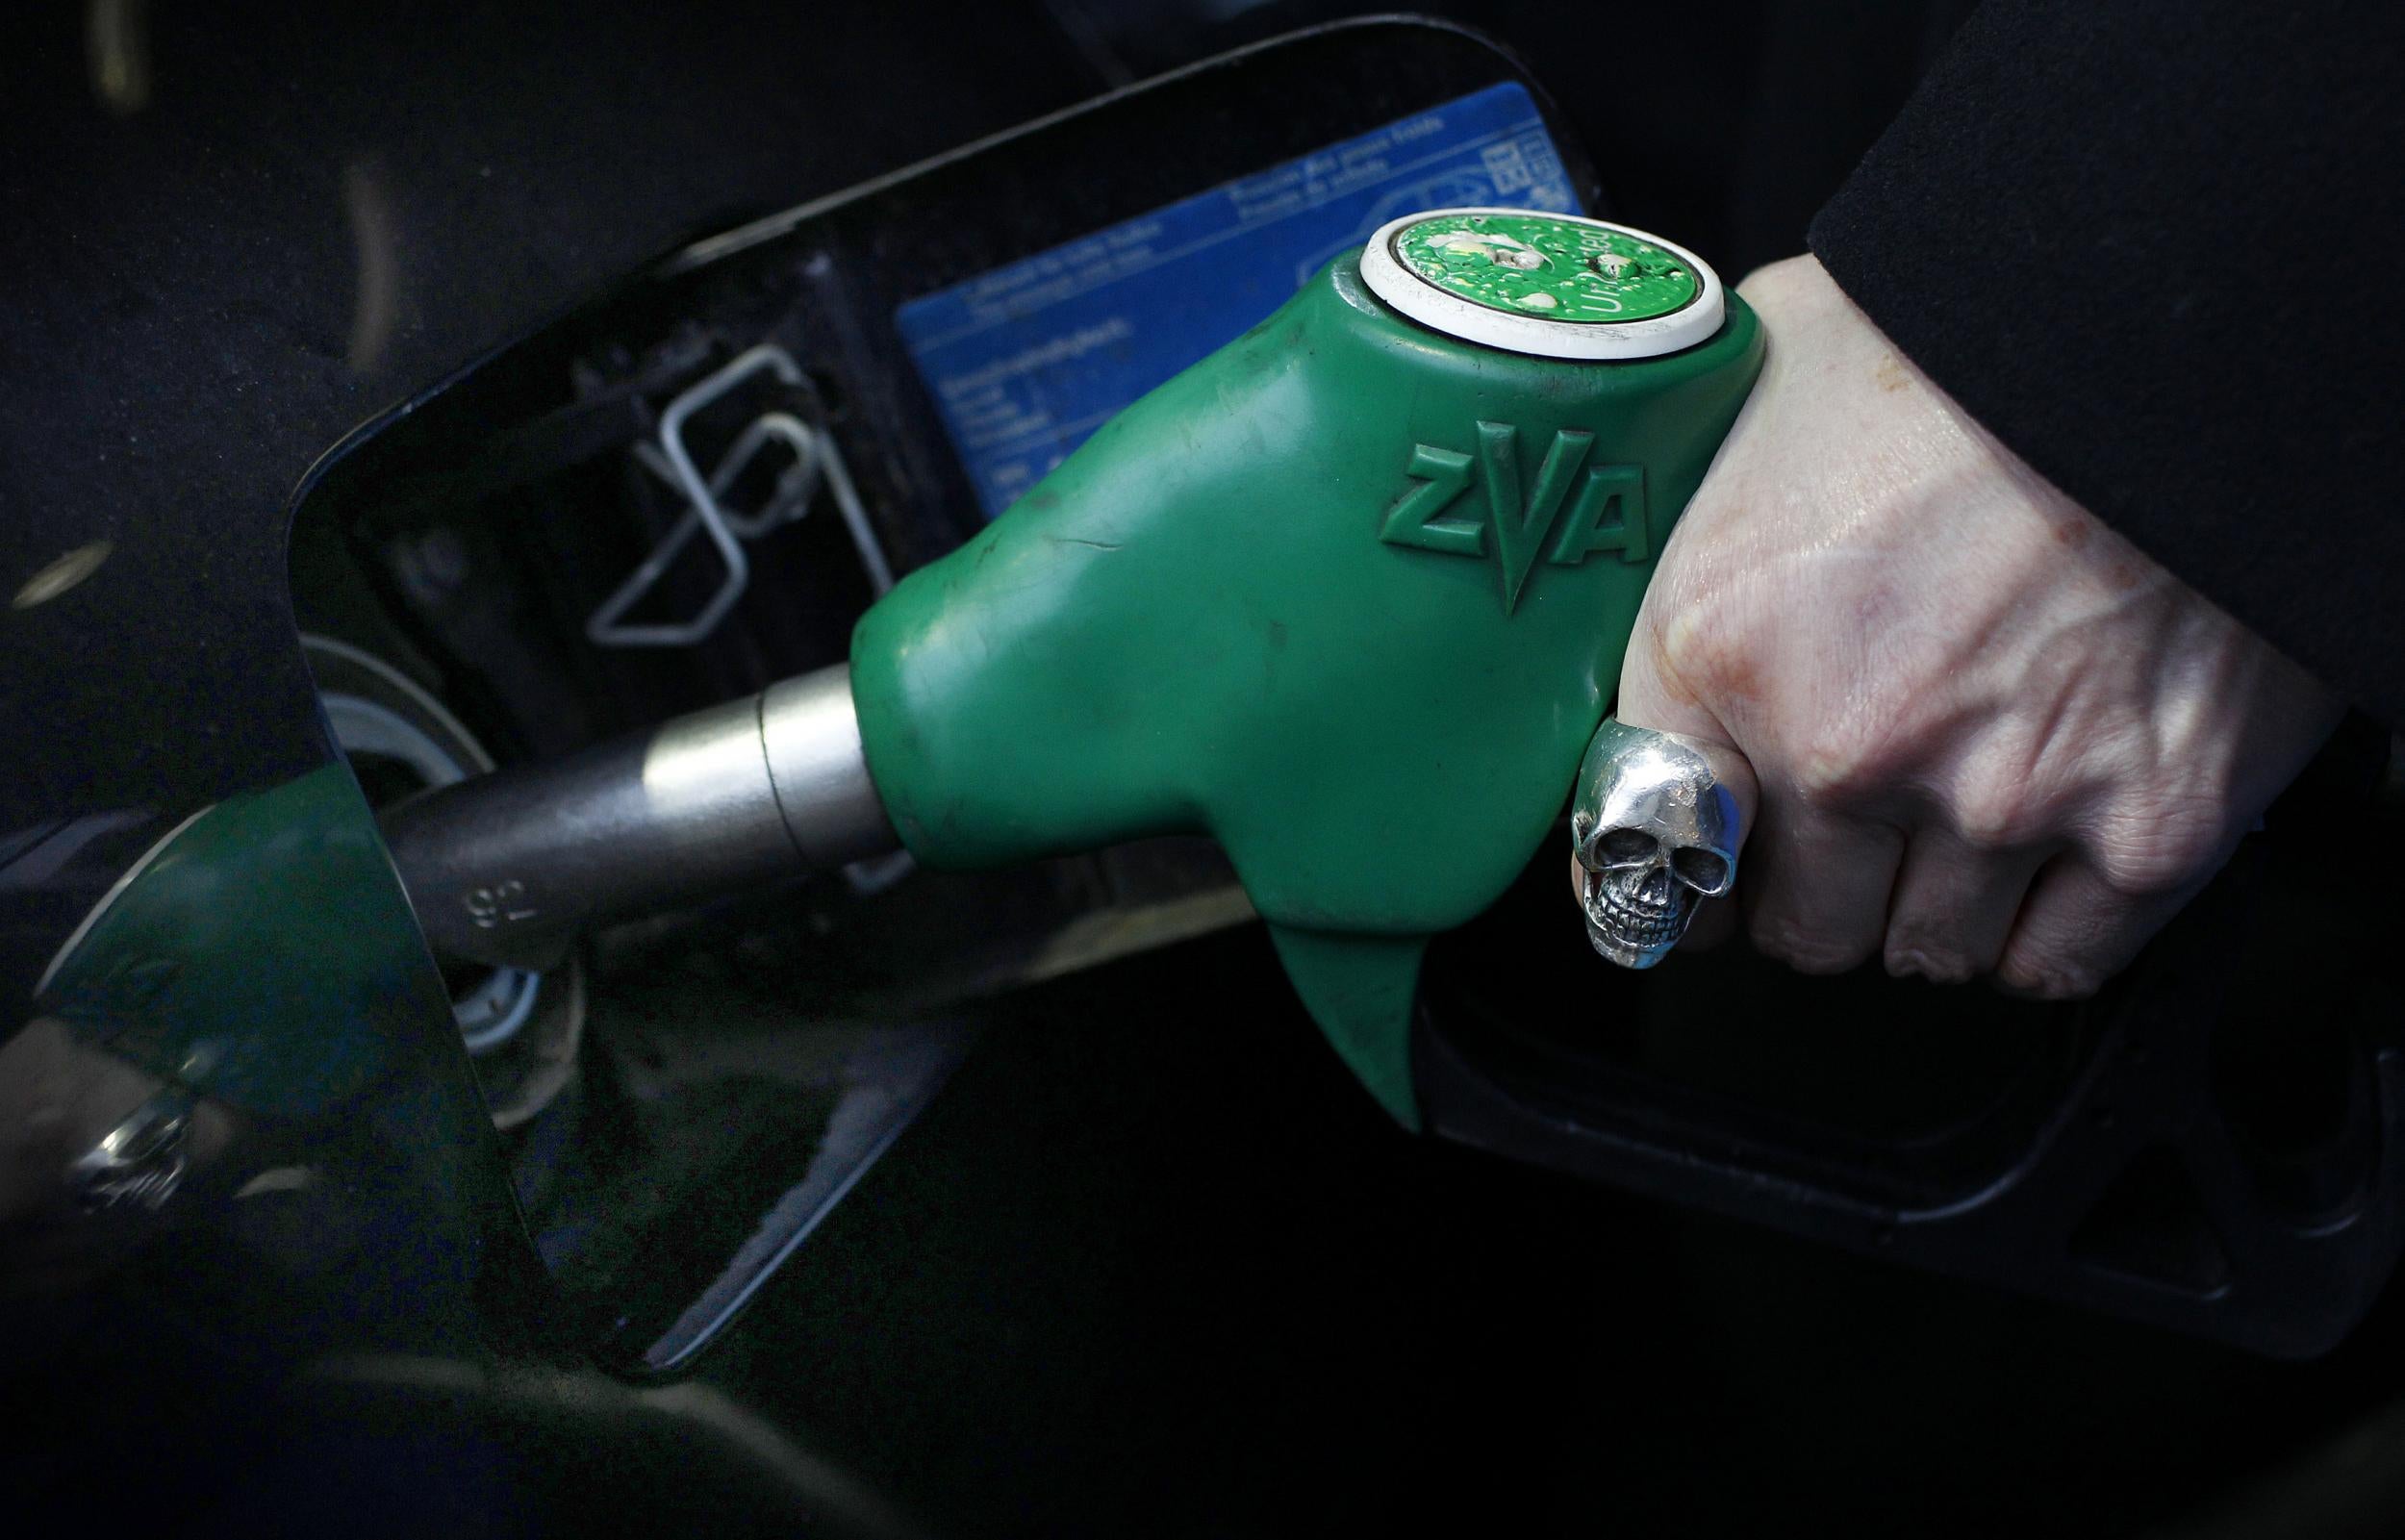 Fuel prices helped push up the inflation rate in July